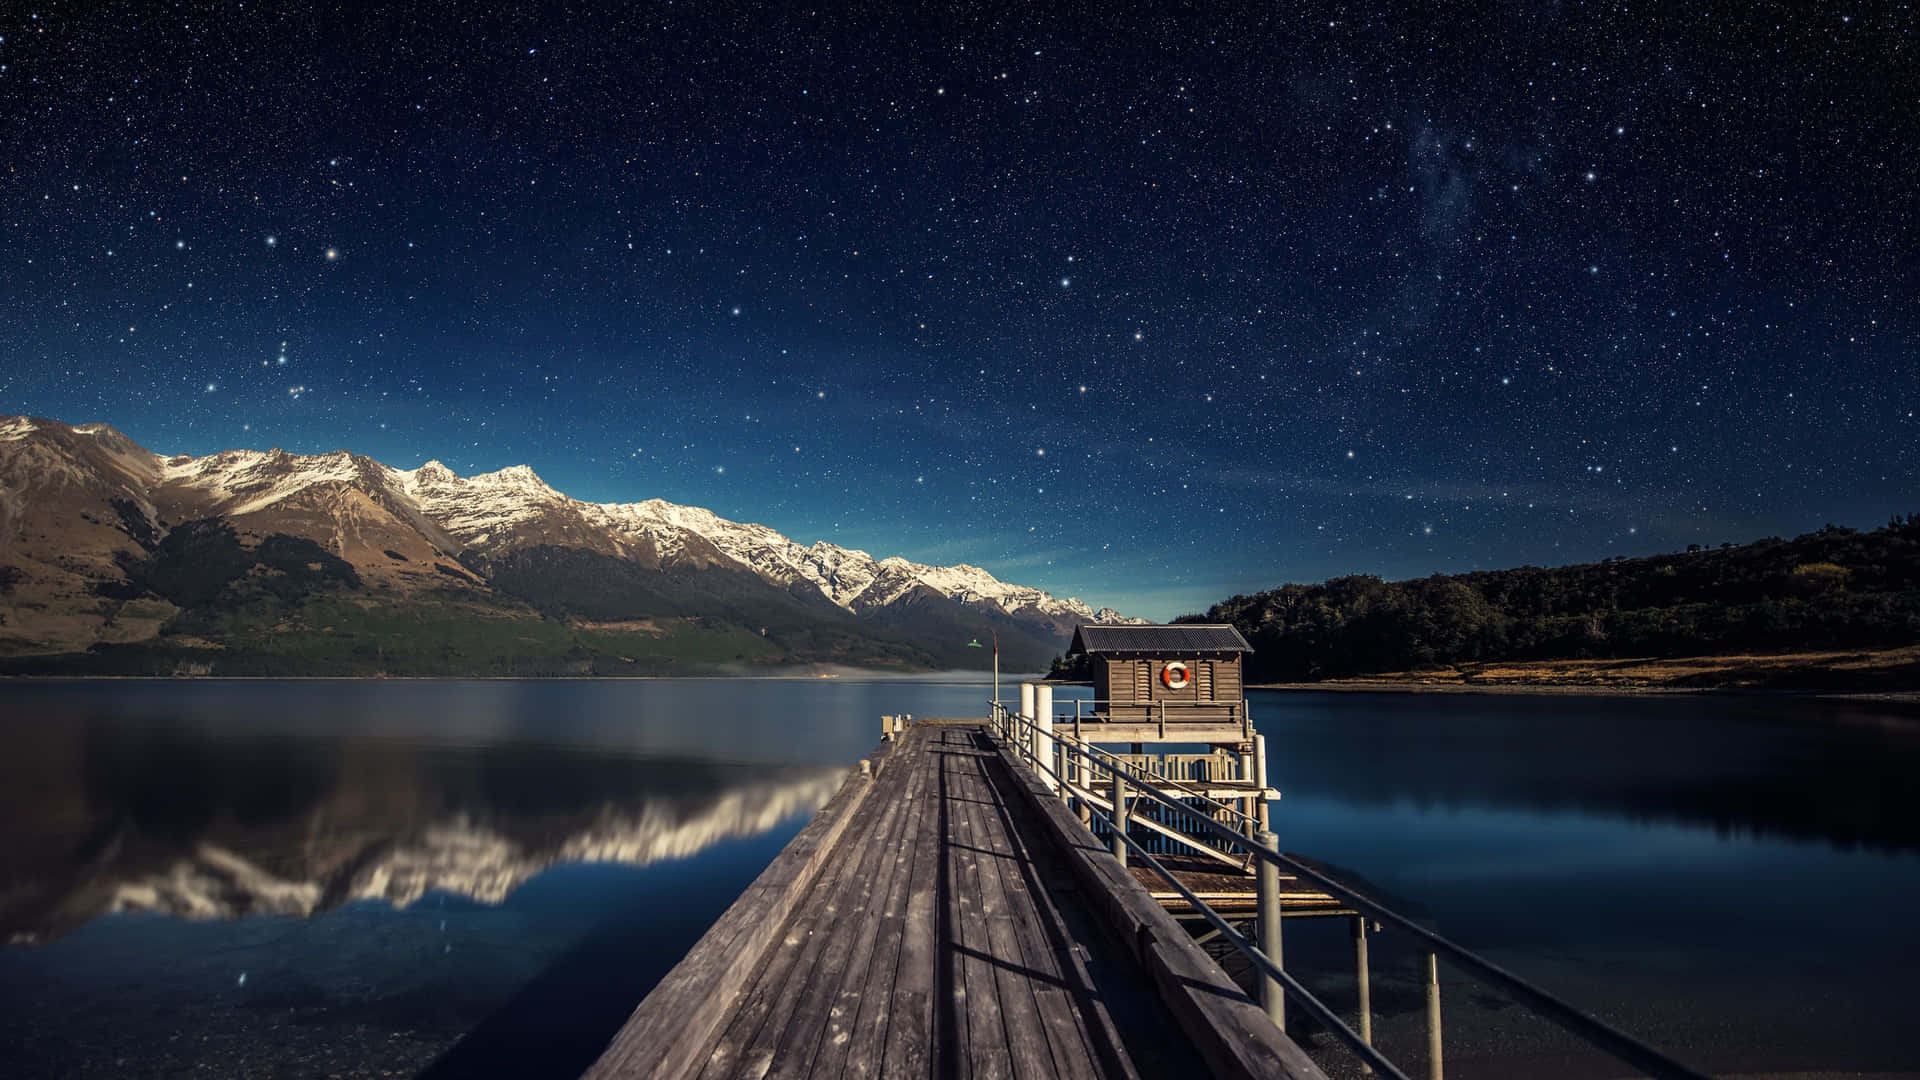 Possible Night Sky Over Mountain Lake Wallpaper